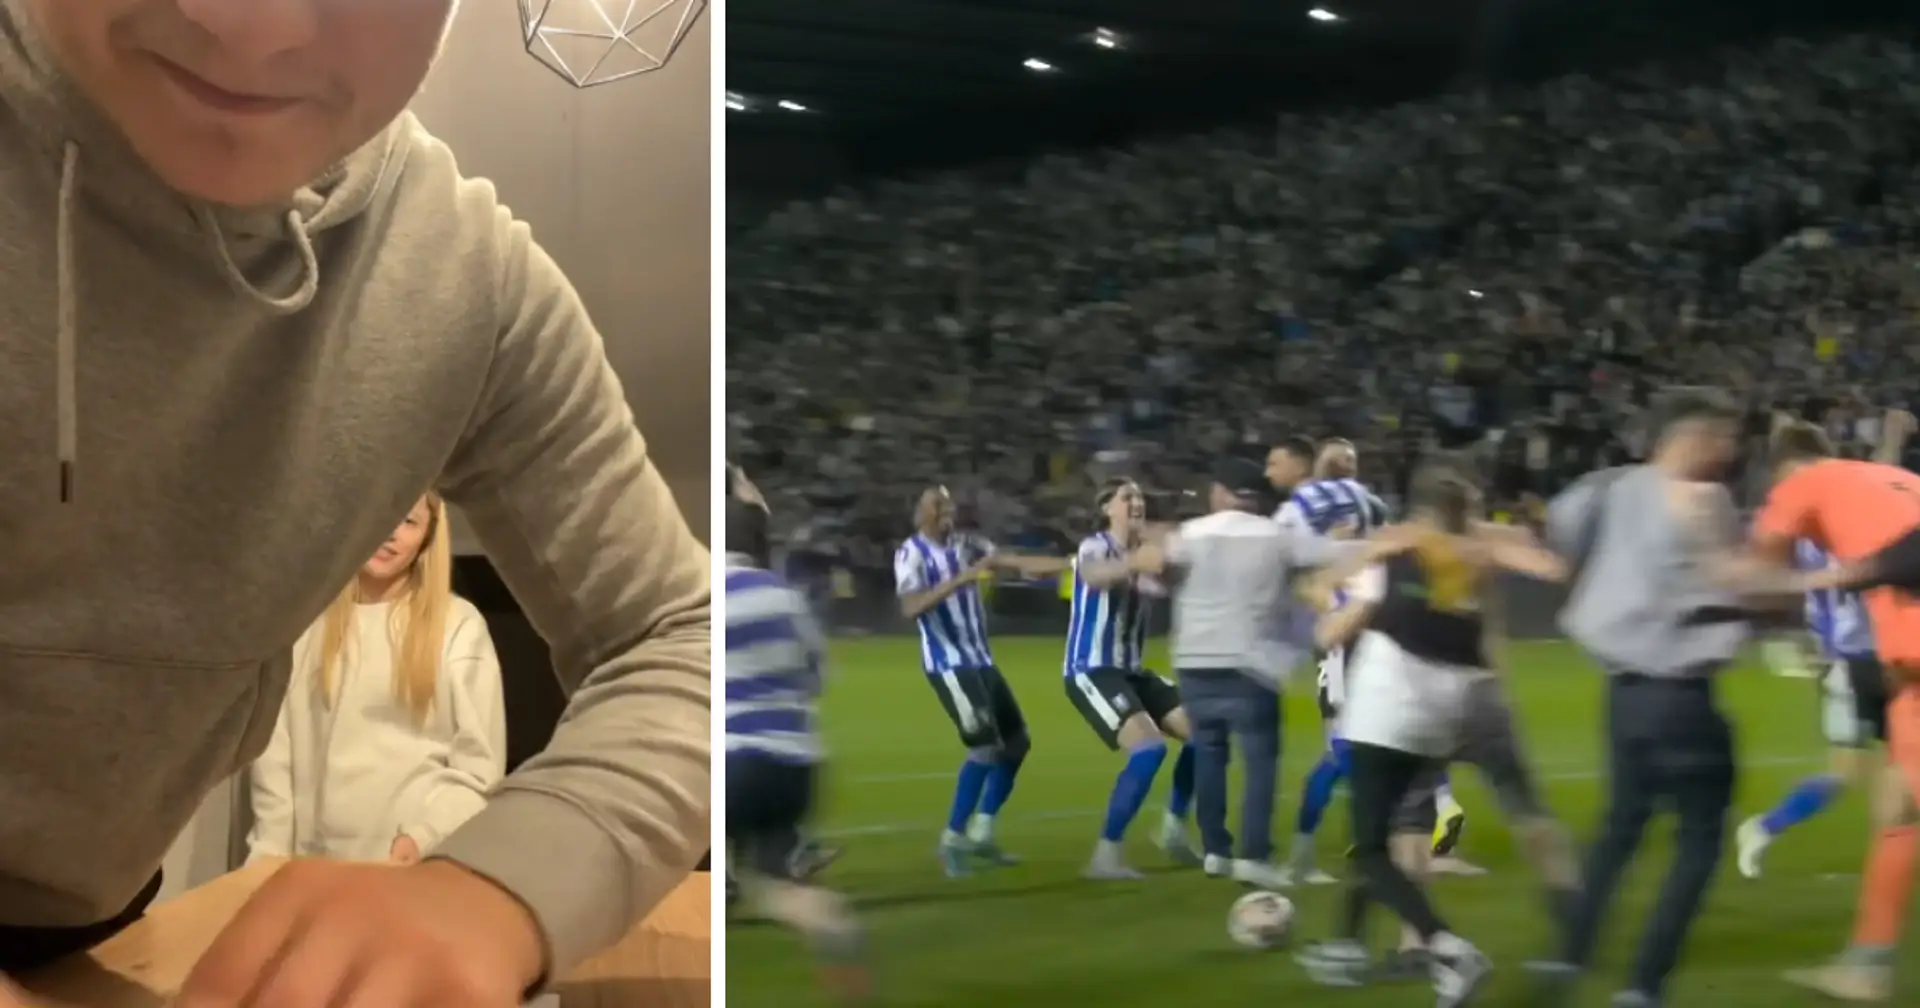 Sheffield Wednesday fan ripped off ticket on camera - his team overcame 4-0 deficit and made it to Wembley